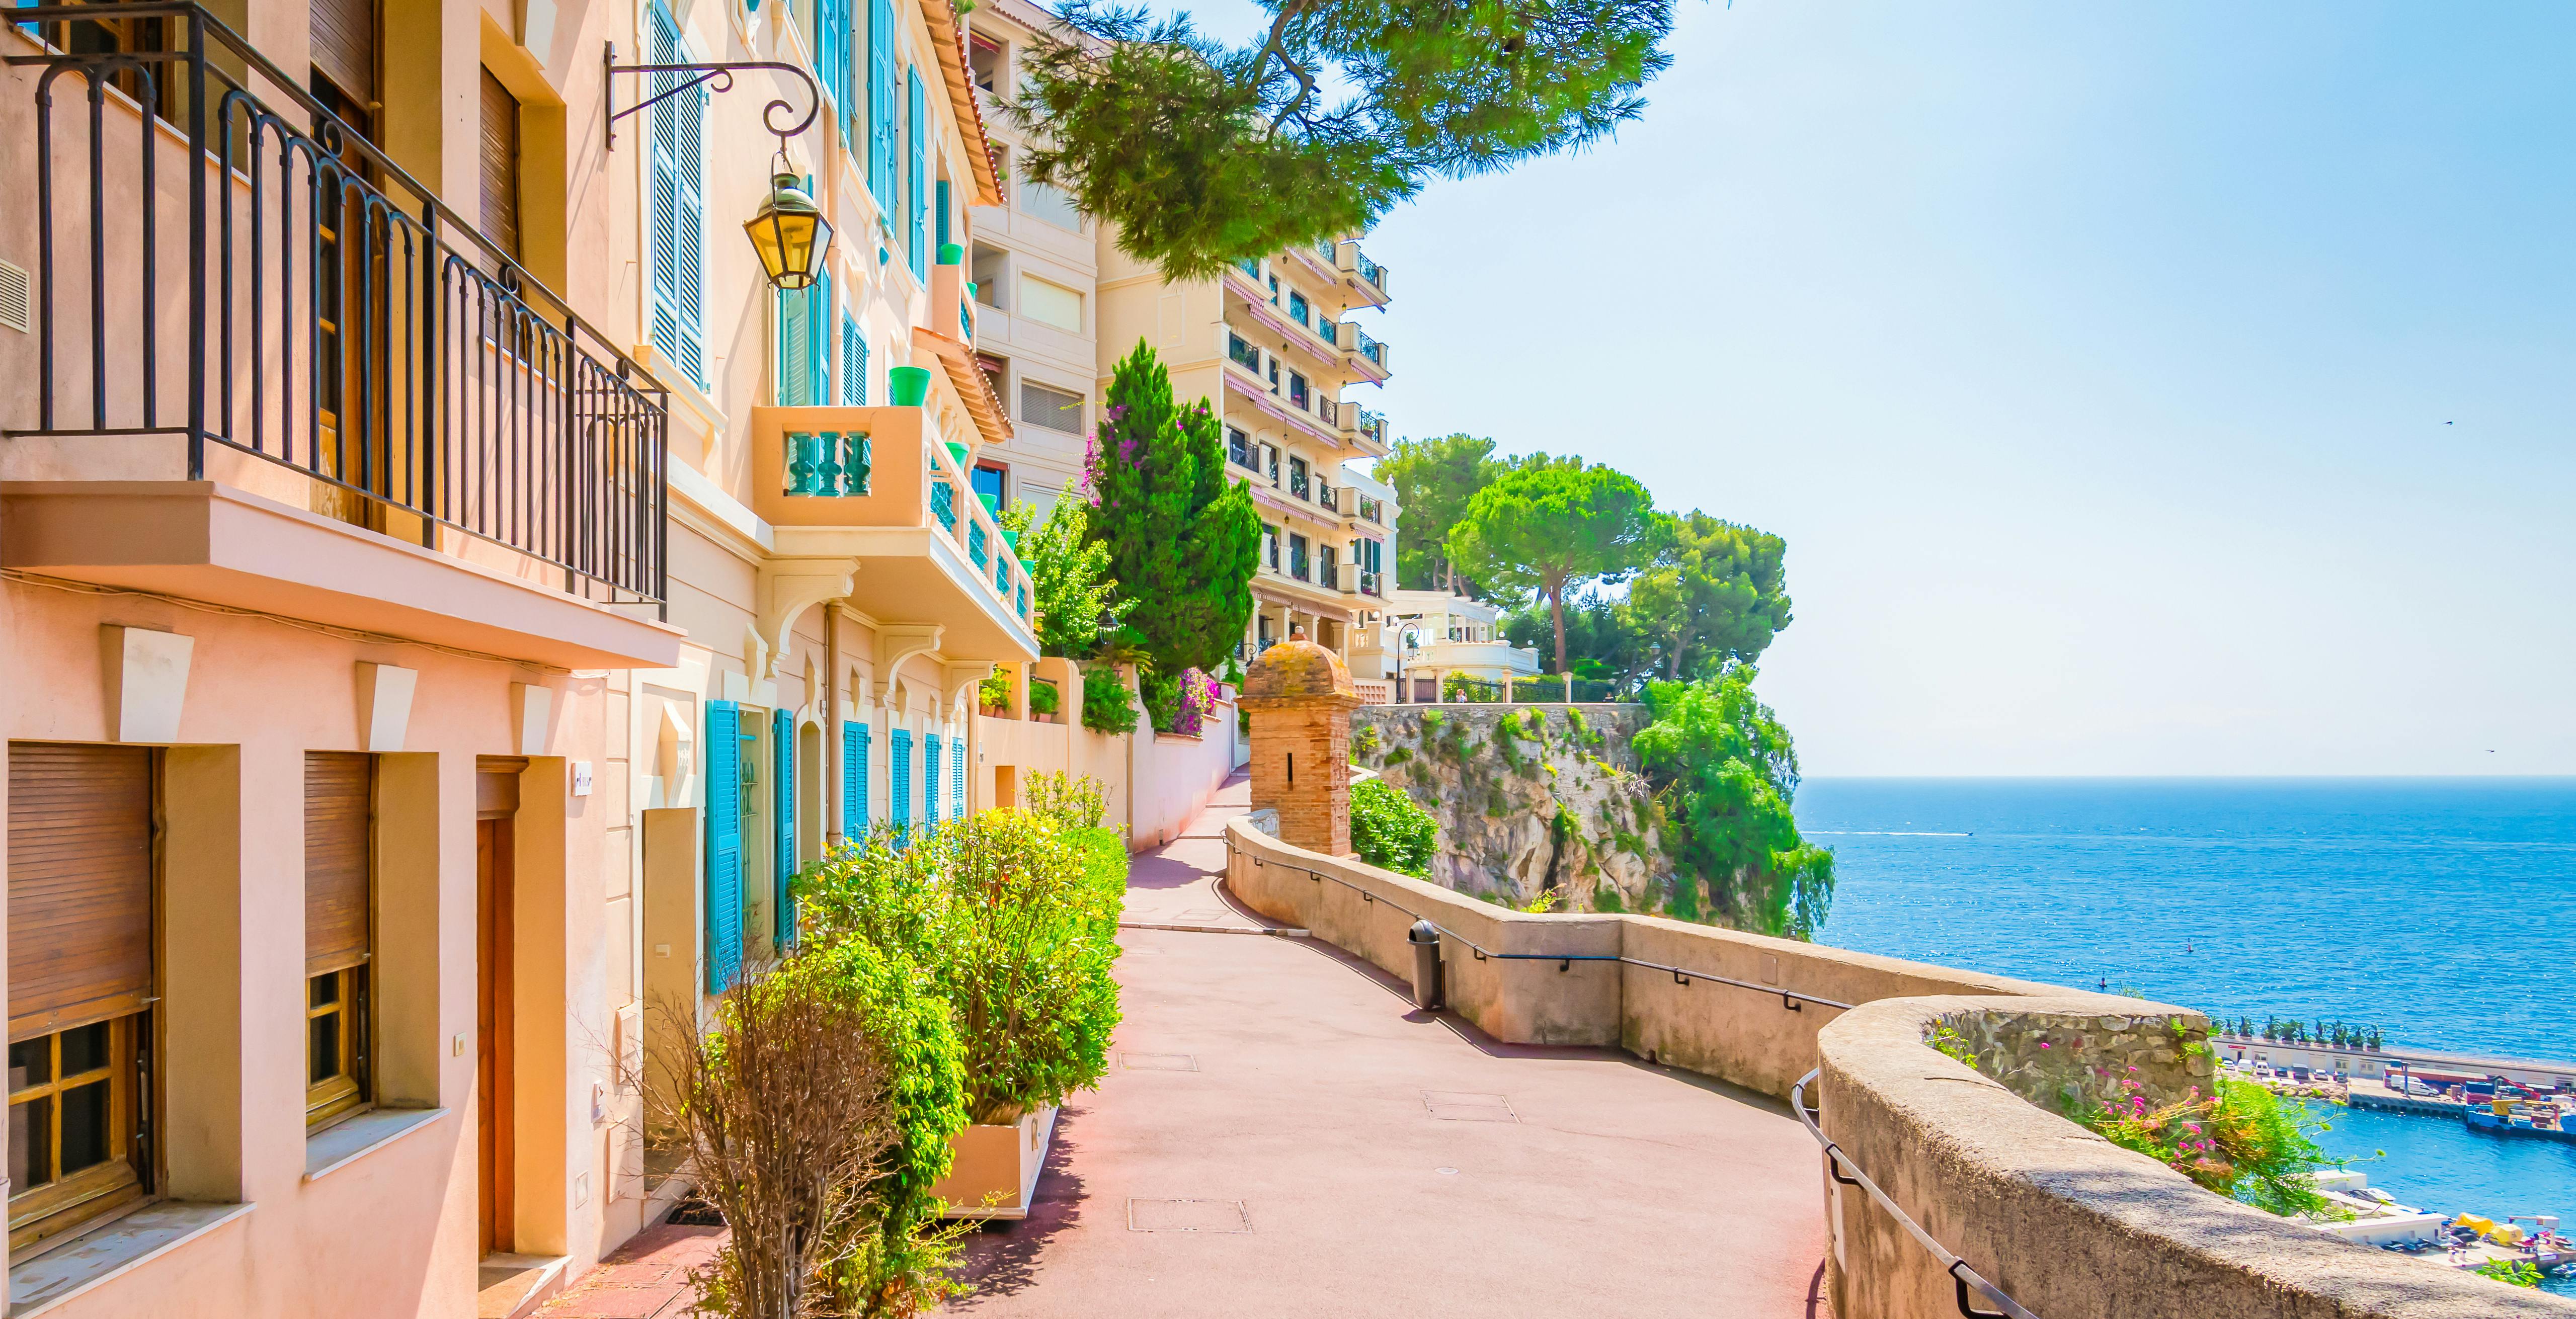 Eze, Monaco & Monte-Carlo half-day shared tour from Nice Musement